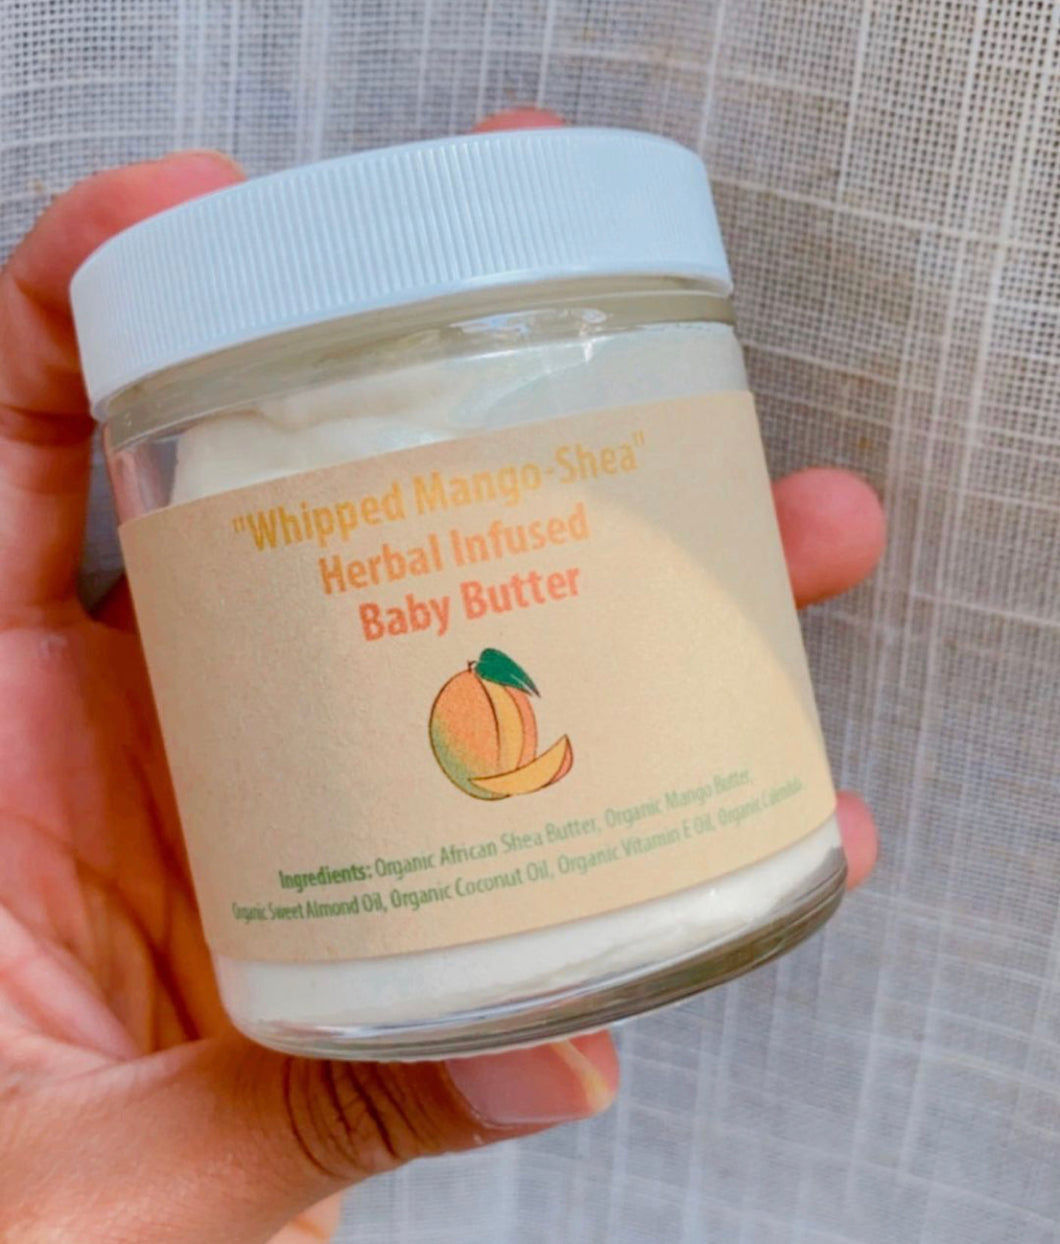 “Whipped Mango-Shea” Herbal Infused Baby Butter